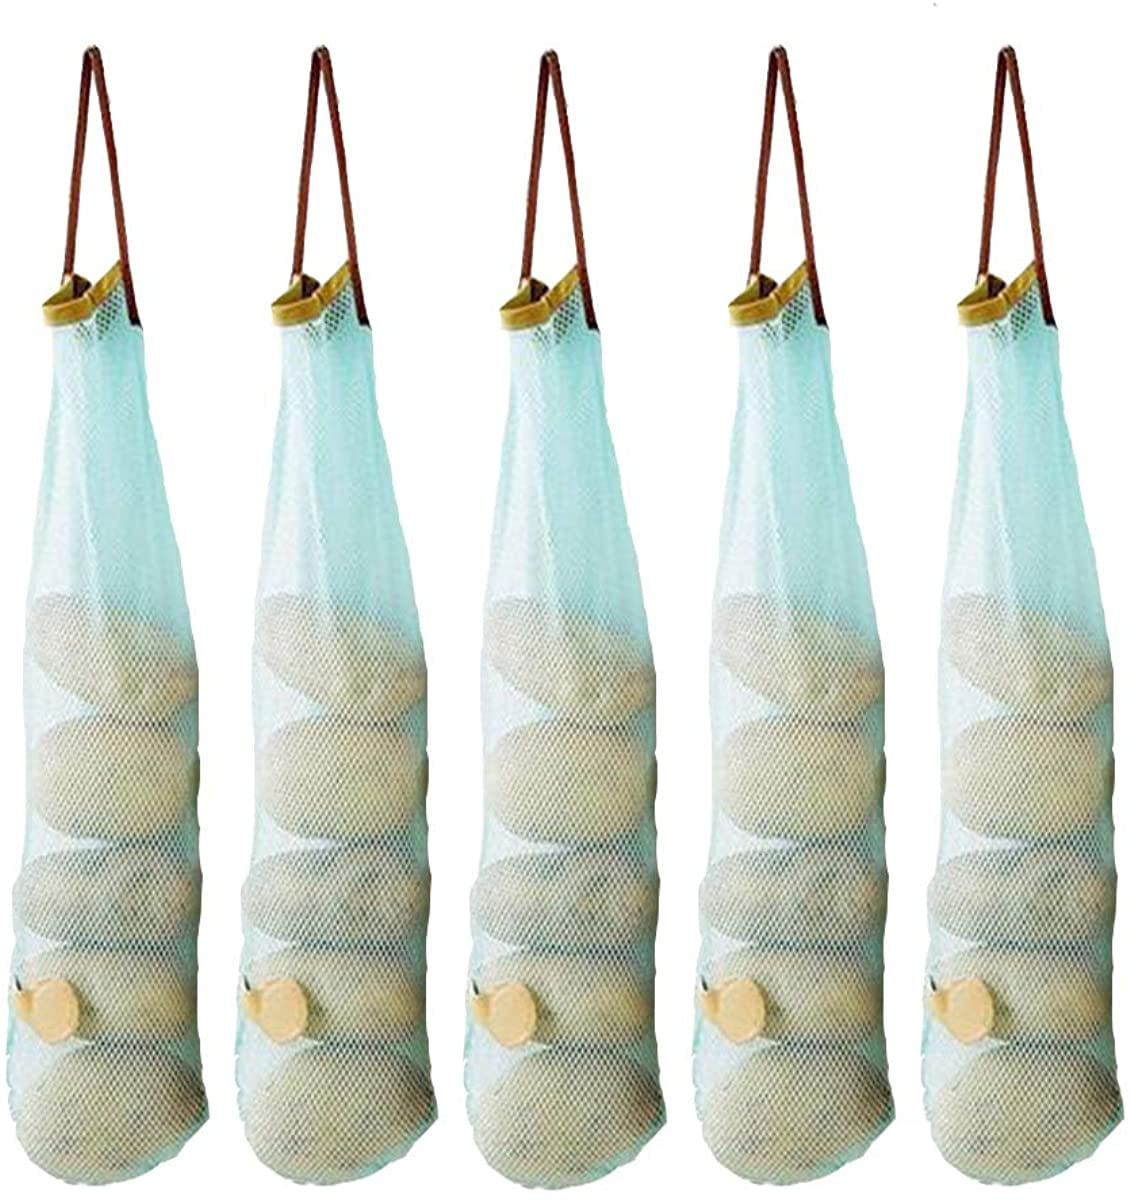 Garlic 6 pack Reusable Onions Storage Bags Potatoes Tomato,Pepper Garlics keeper Holder Hanging Fruit and Vegetable Mesh Net Bags 